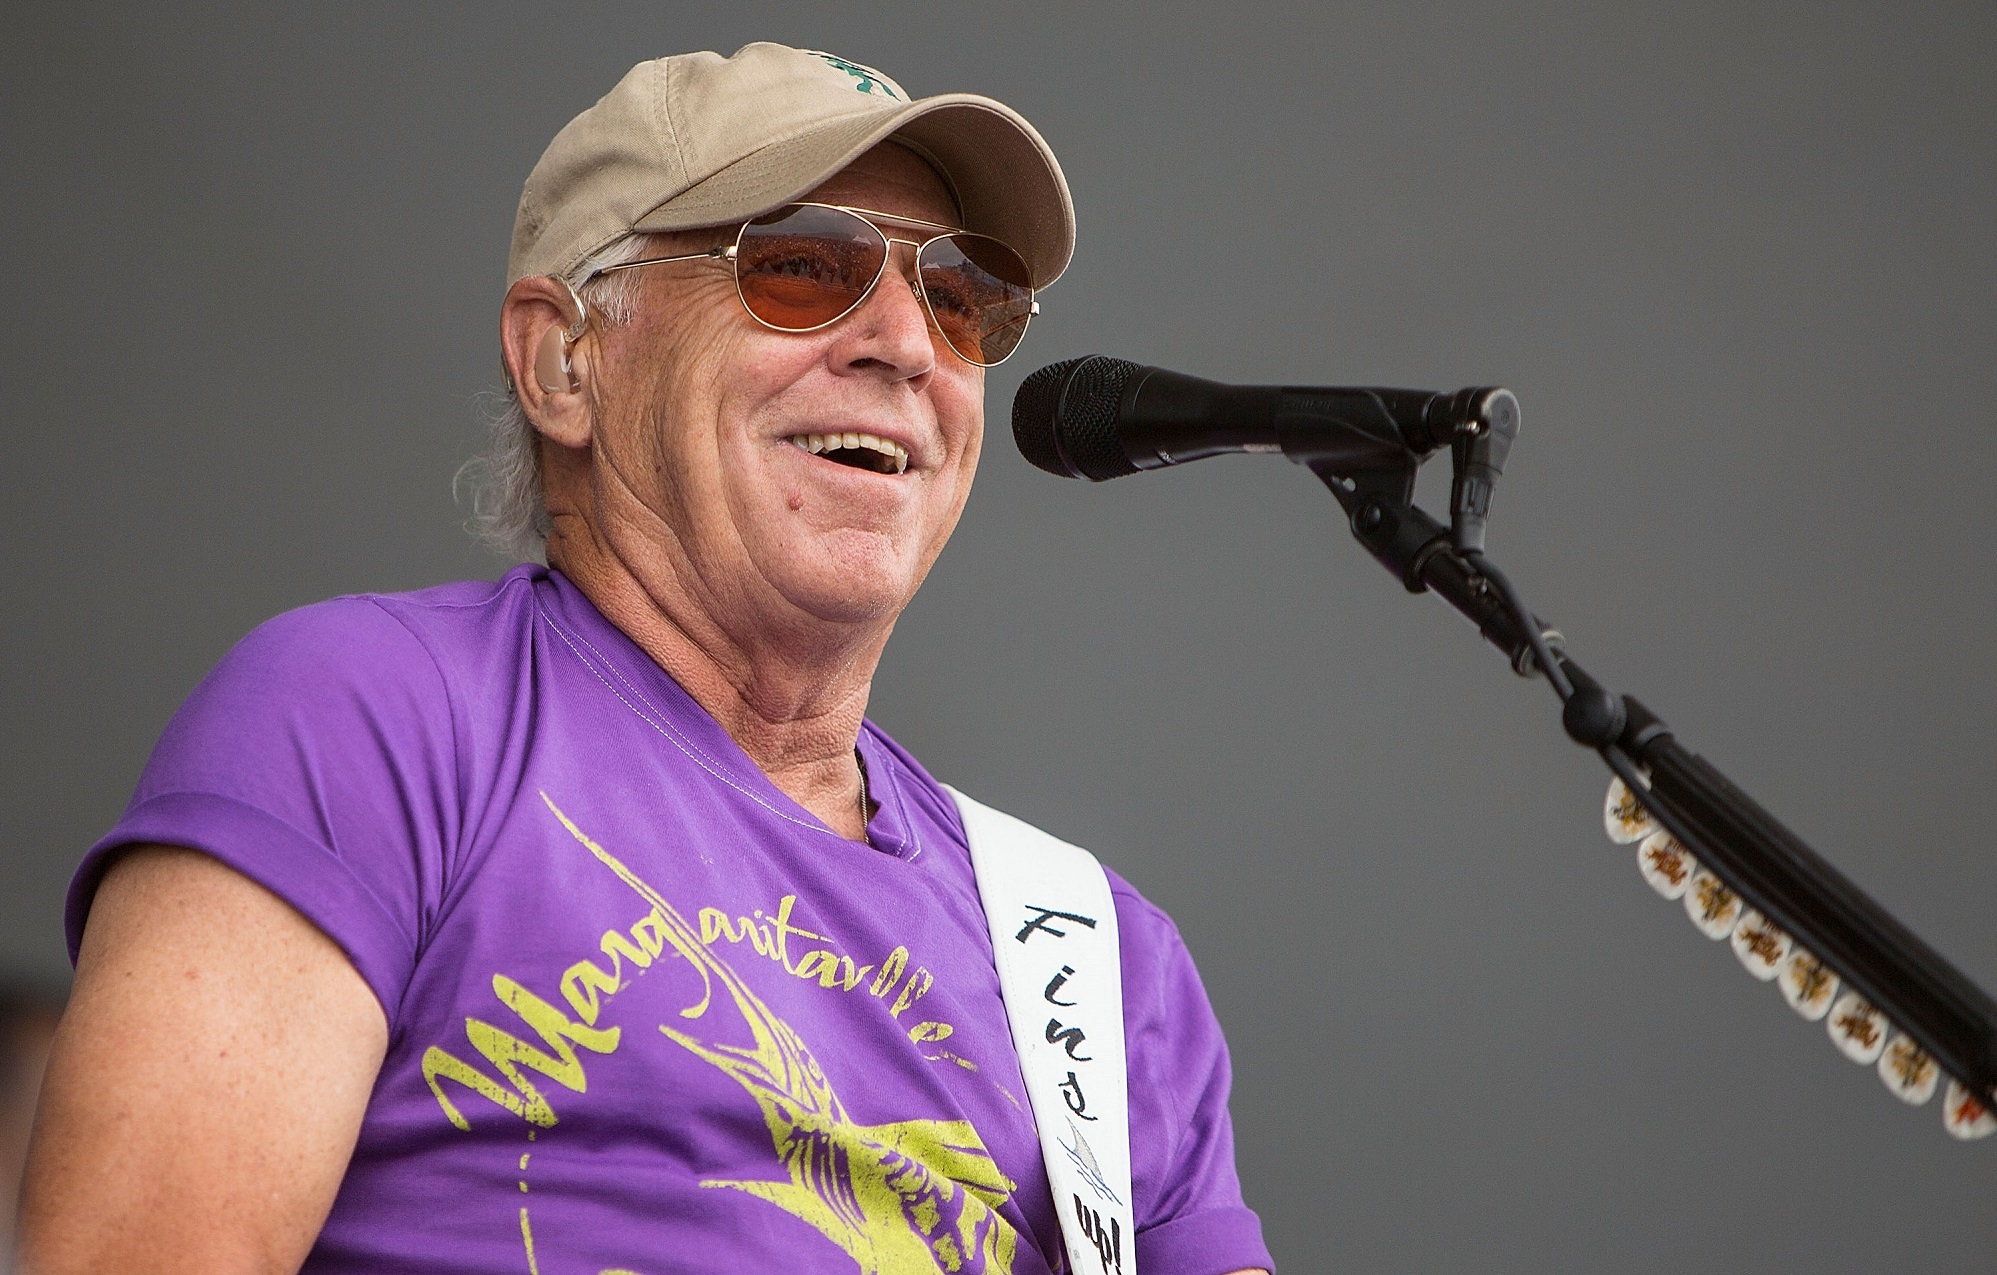 Why the rare skin cancer that killed Jimmy Buffett may become more common